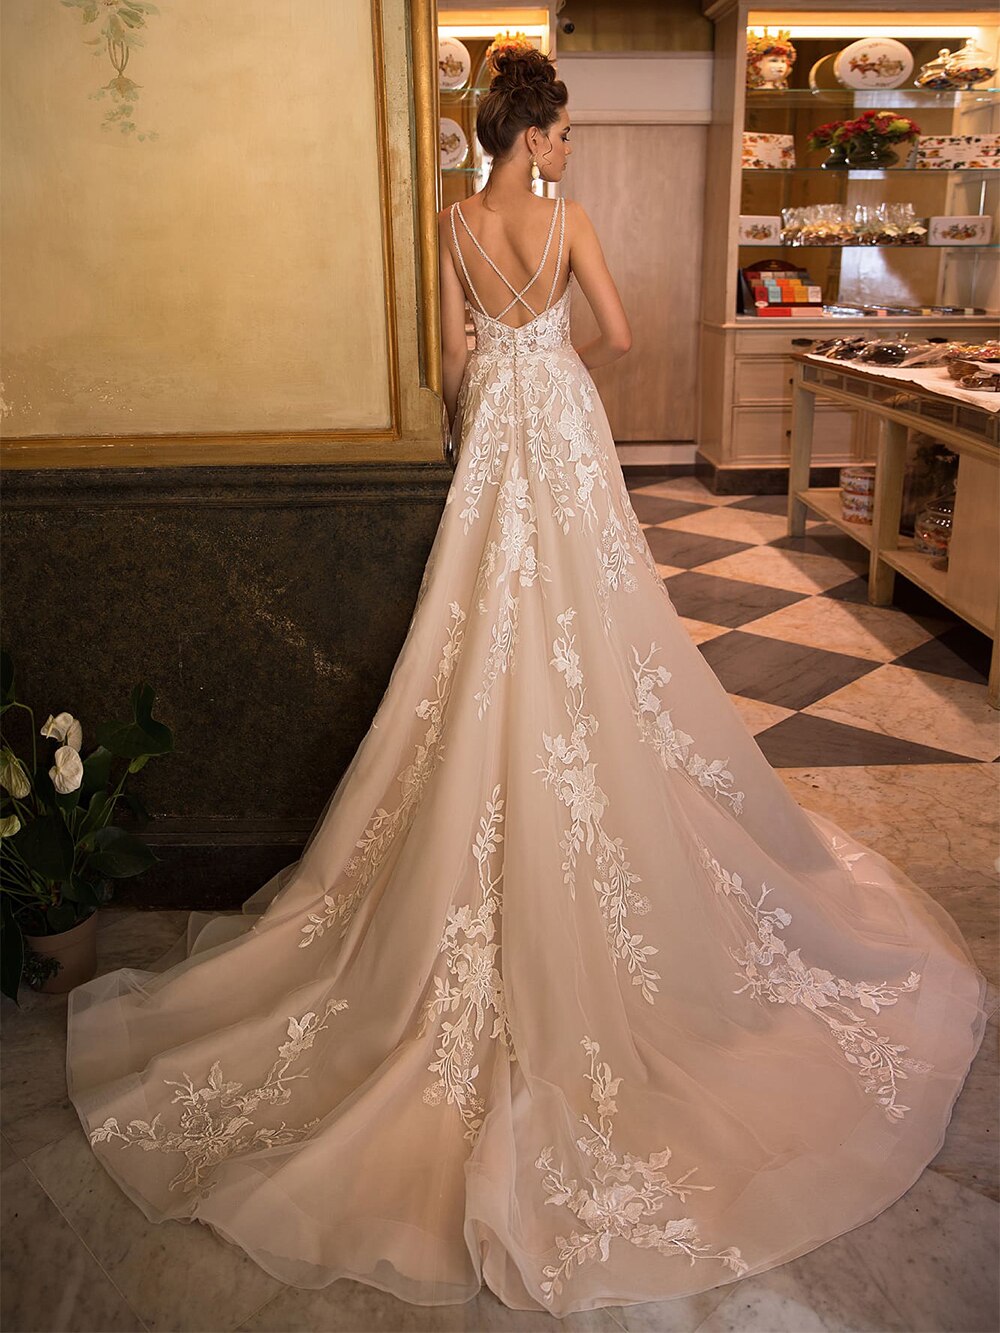 2021 New Sexy Sweetheart Backless Spaghetti Straps A-Line Wedding Dresses Appliqued Beading Crystal Floor Length Bridal Gowns - LiveTrendsX